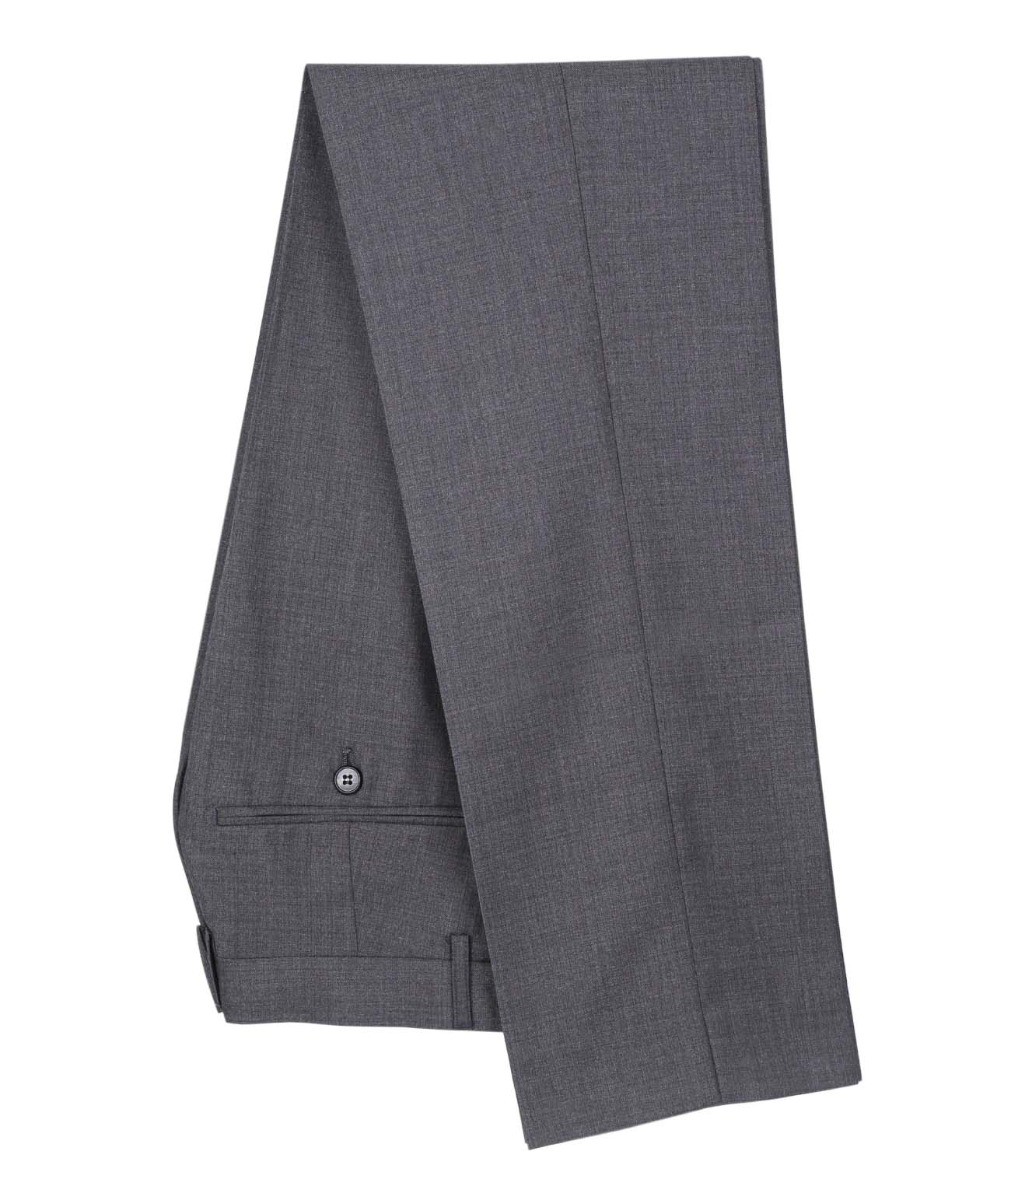 Men's Tailored Fit Formal Trousers  - CHARLES - Charcoal Grey